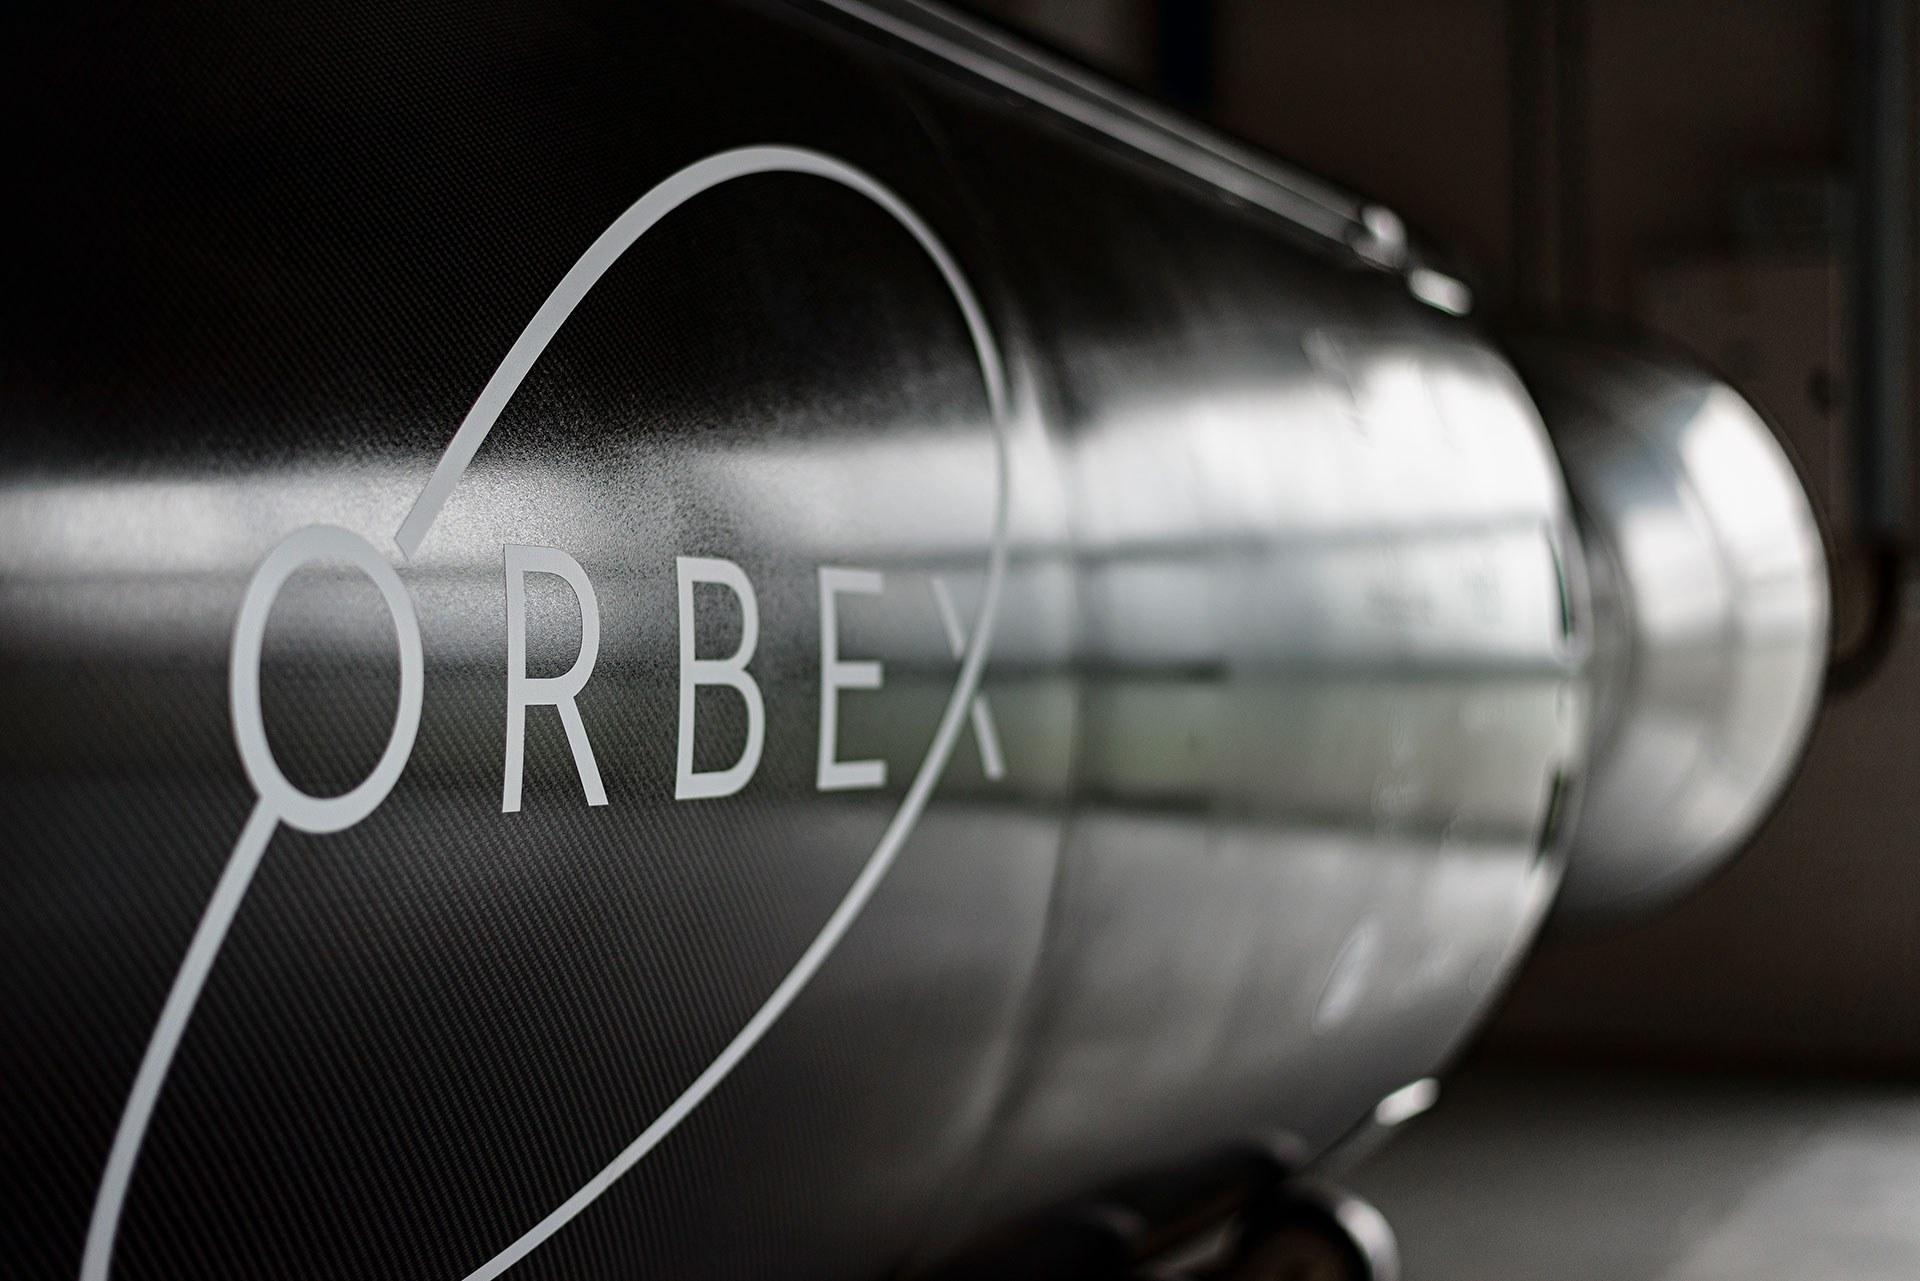 Investment Company Hails Orbex Space as “Amazing Innovators”